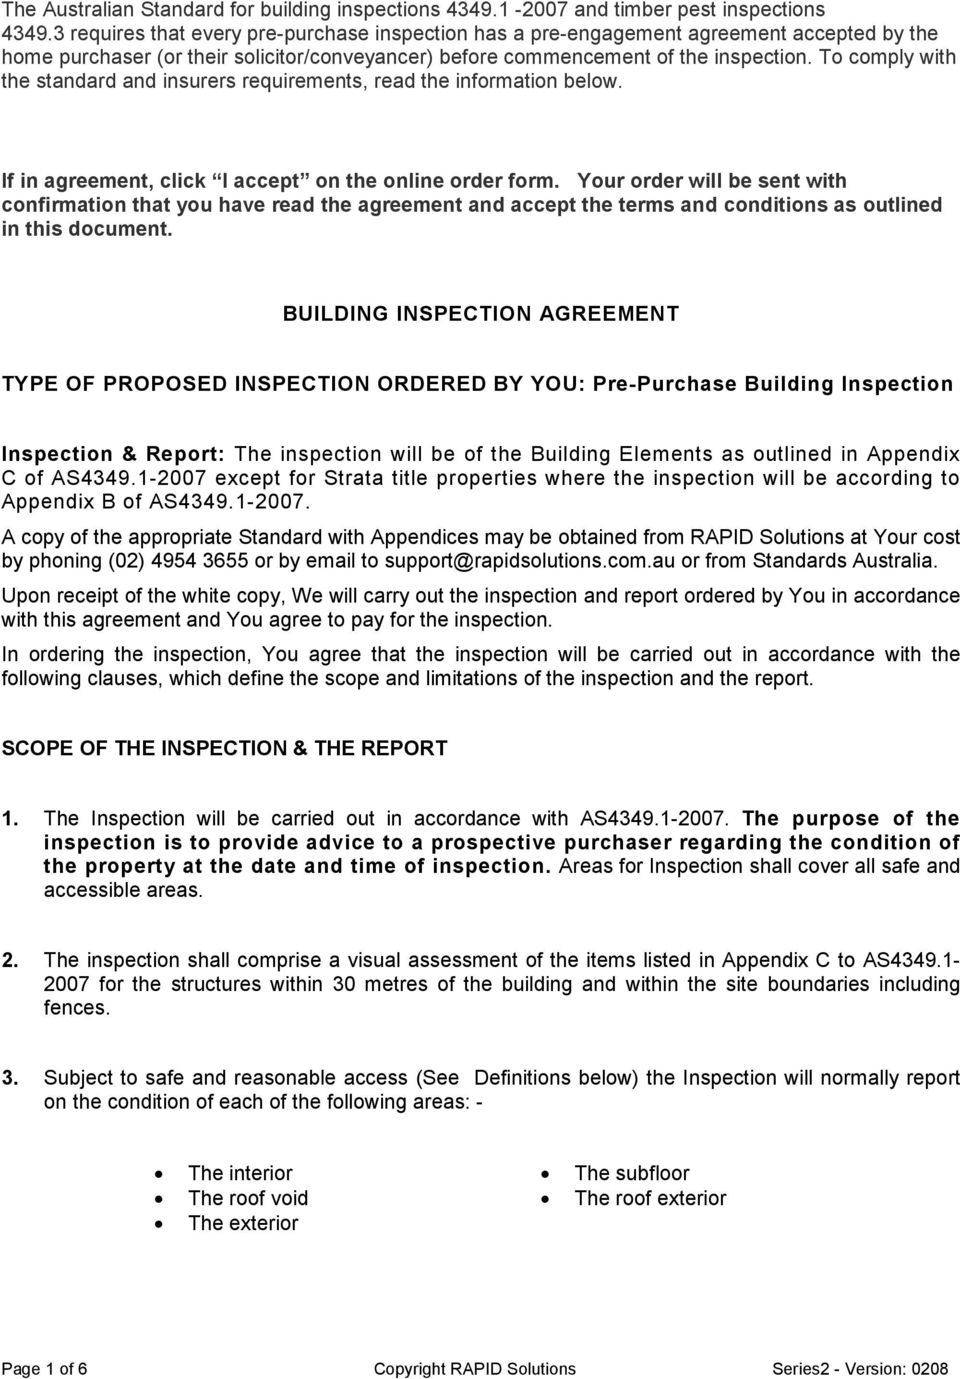 Building Inspection Agreement. Type Of Proposed Inspection Regarding Pre Purchase Building Inspection Report Template